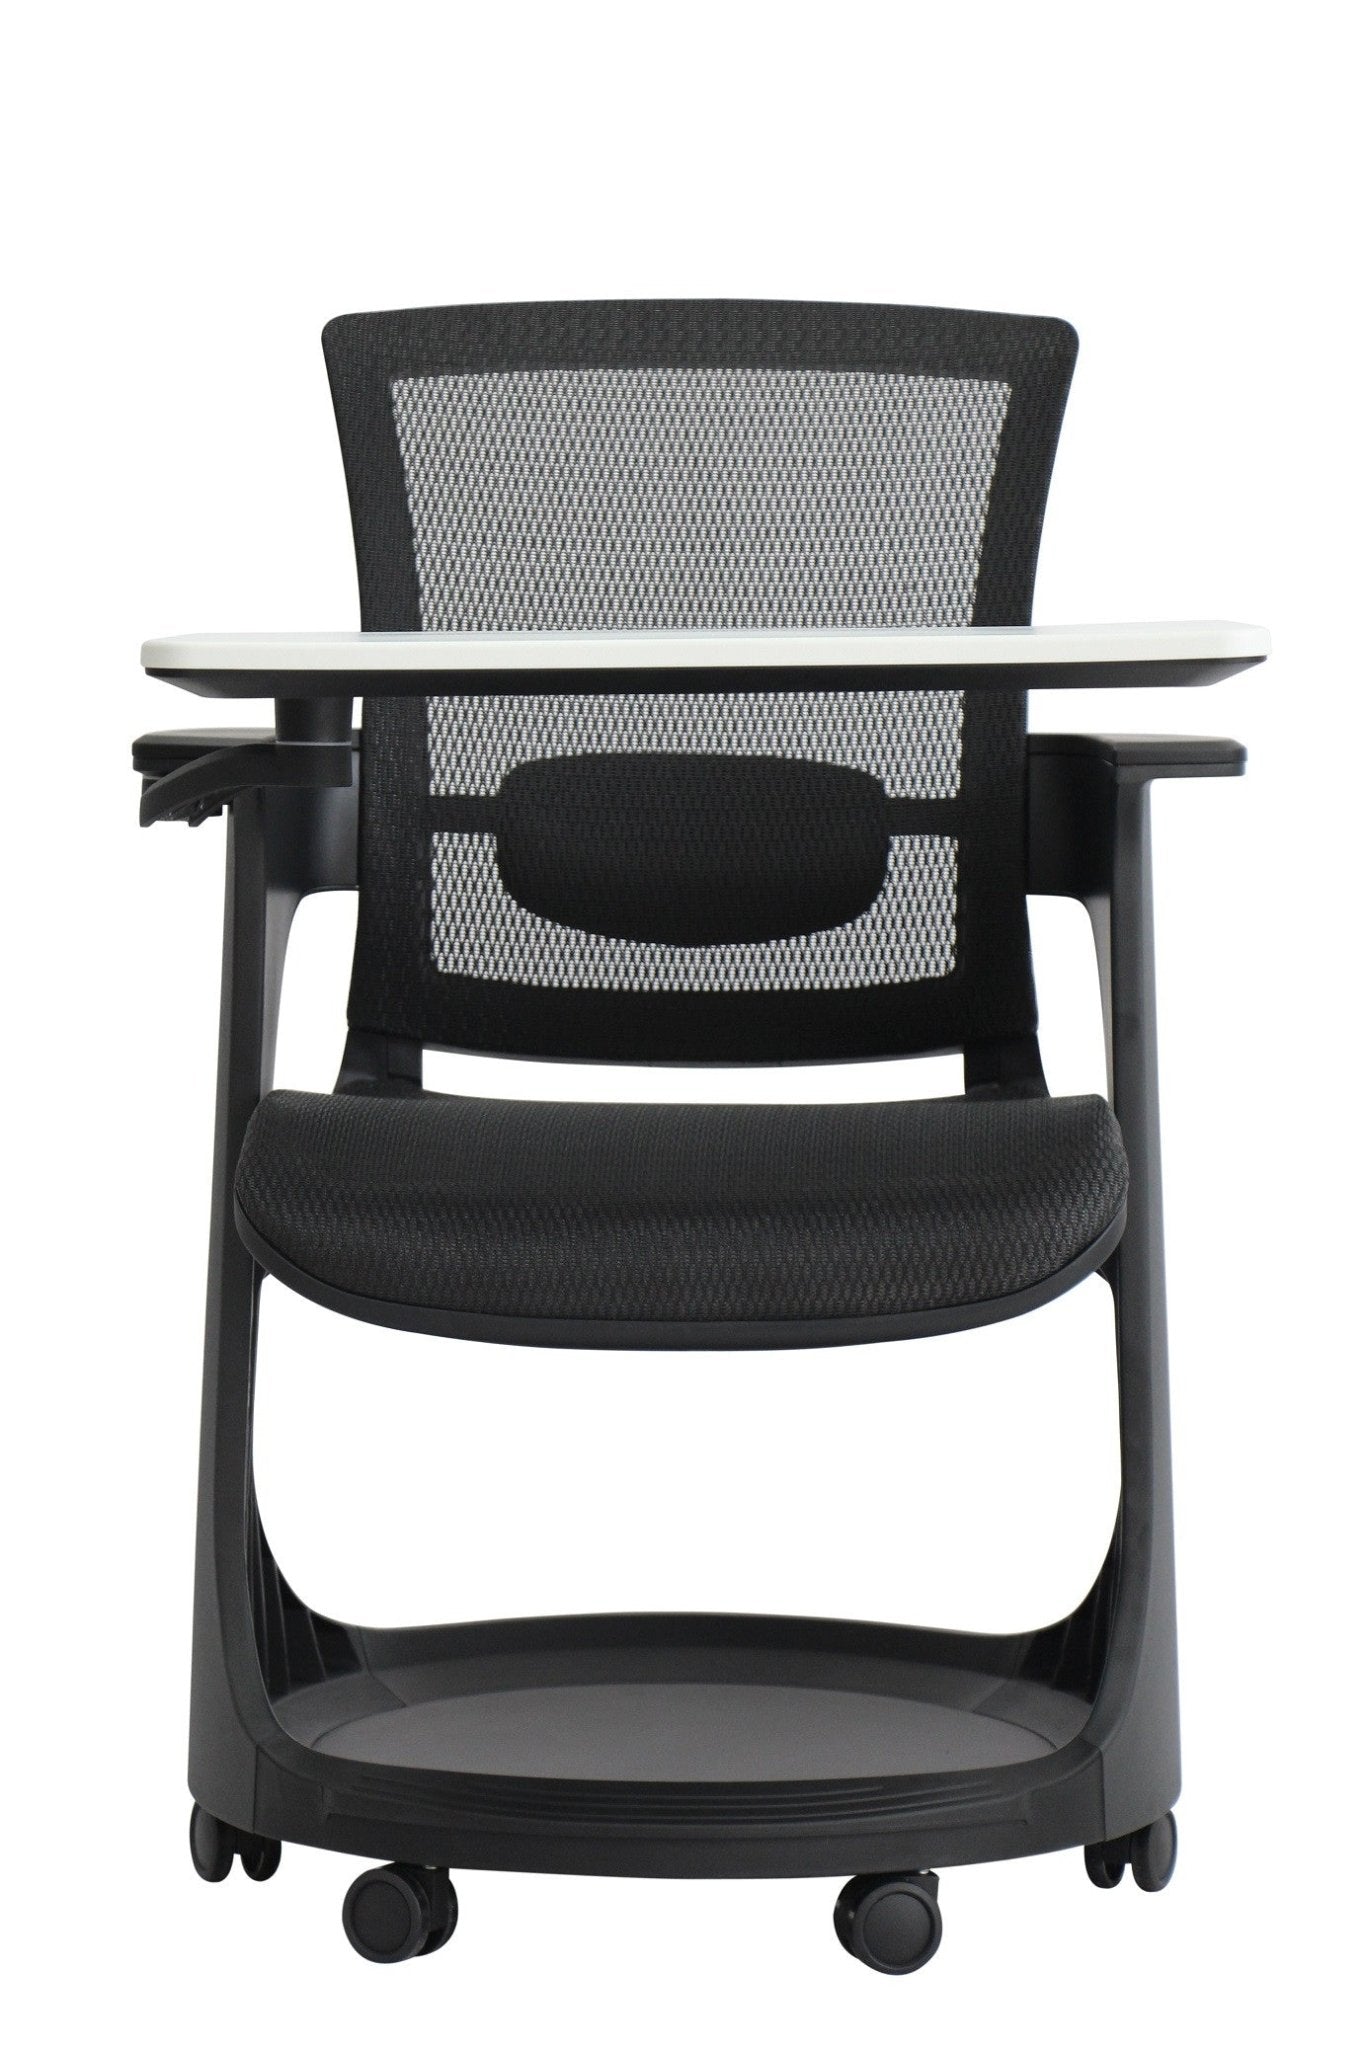 Black Mesh Rolling Office Chair - Tuesday Morning-Office Chairs